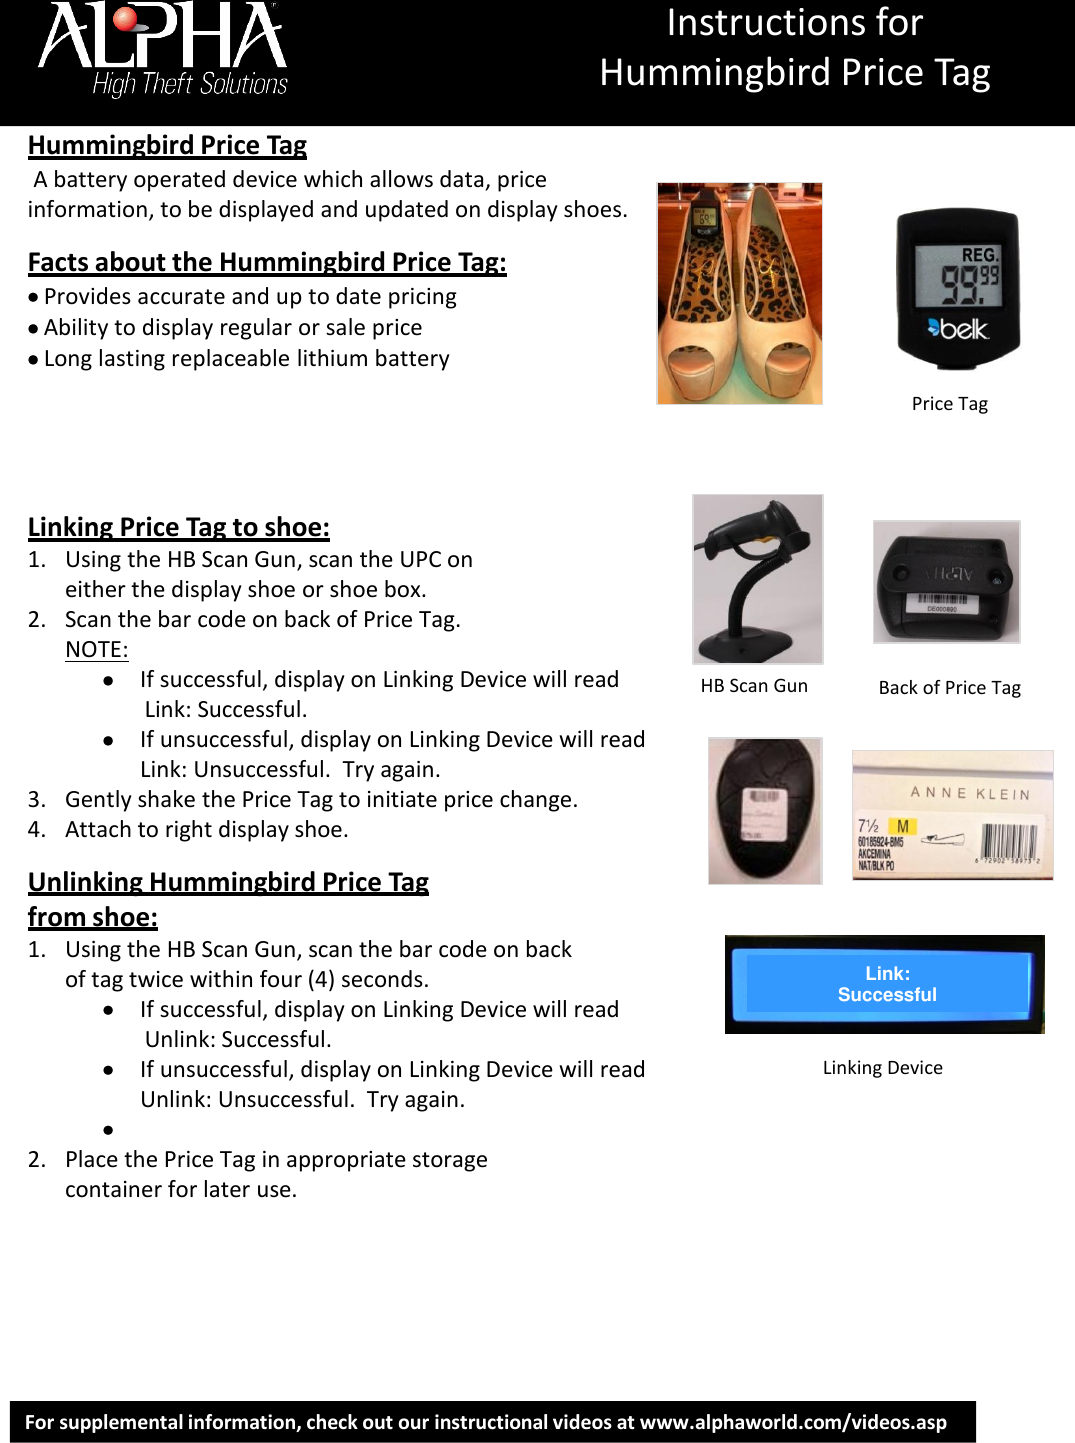 Instructions for Hummingbird Price Tag For supplemental information, check out our instructional videos at www.alphaworld.com/videos.asp   Hummingbird Price Tag  A battery operated device which allows data, price information, to be displayed and updated on display shoes.   Facts about the Hummingbird Price Tag:  Provides accurate and up to date pricing  Ability to display regular or sale price  Long lasting replaceable lithium battery        Linking Price Tag to shoe: 1. Using the HB Scan Gun, scan the UPC on either the display shoe or shoe box. 2. Scan the bar code on back of Price Tag. NOTE:  If successful, display on Linking Device will read                Link: Successful.    If unsuccessful, display on Linking Device will read Link: Unsuccessful.  Try again. 3. Gently shake the Price Tag to initiate price change. 4. Attach to right display shoe.   Unlinking Hummingbird Price Tag from shoe: 1. Using the HB Scan Gun, scan the bar code on back of tag twice within four (4) seconds.   If successful, display on Linking Device will read                Unlink: Successful.    If unsuccessful, display on Linking Device will read Unlink: Unsuccessful.  Try again.   2. Place the Price Tag in appropriate storage container for later use.          HB Scan Gun Back of Price Tag Link: Successful Linking Device Price Tag 